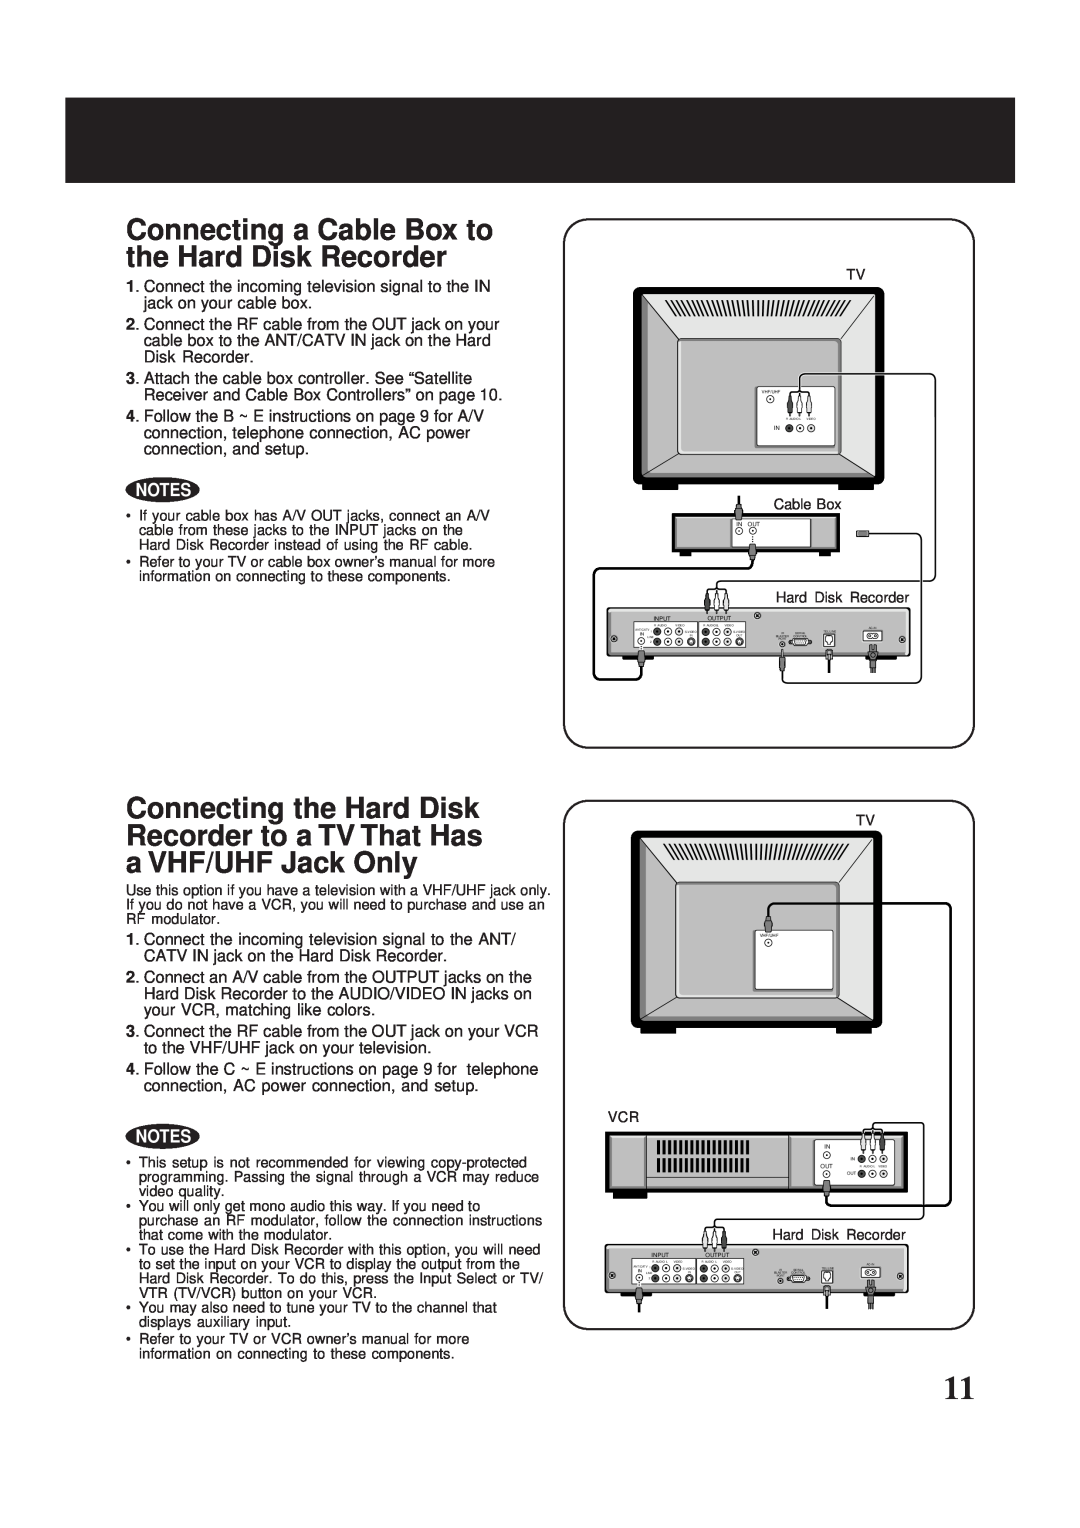 Panasonic PV-HS2000 operating instructions Connecting a Cable Box to the Hard Disk Recorder 